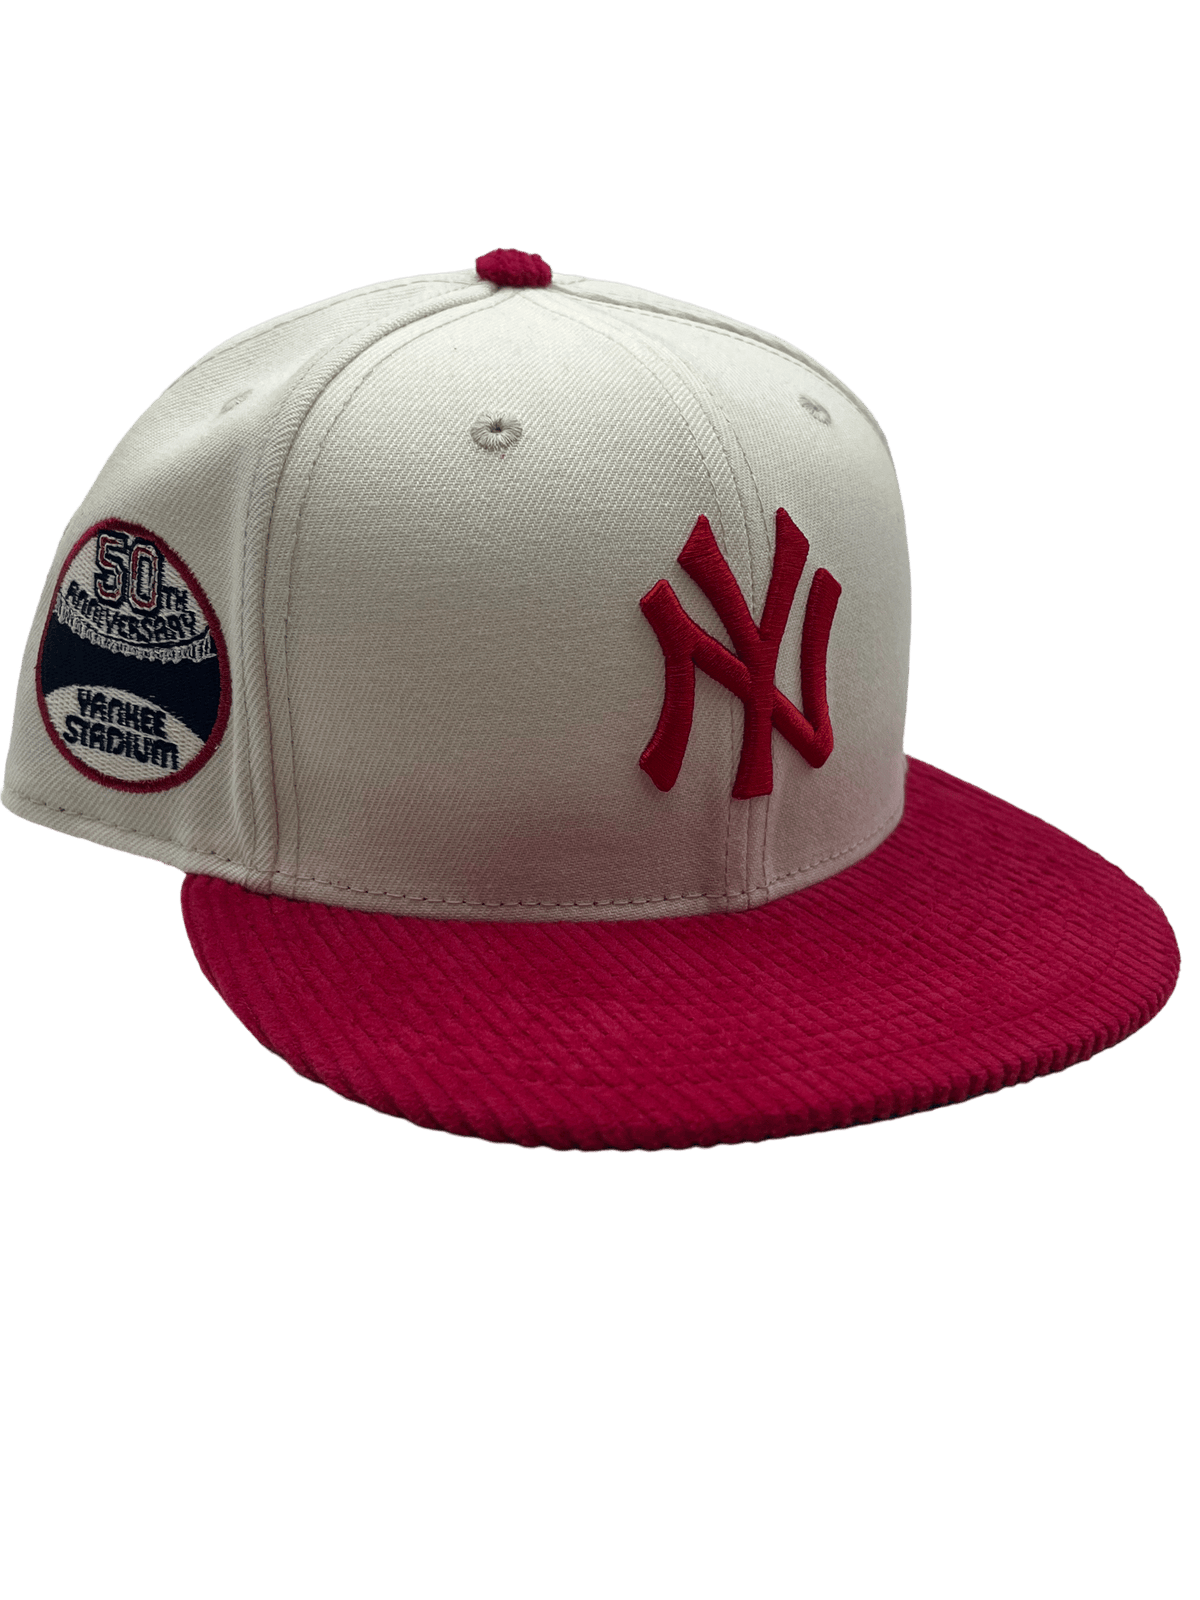 New York Yankees New Era White on White 59FIFTY Fitted Hat